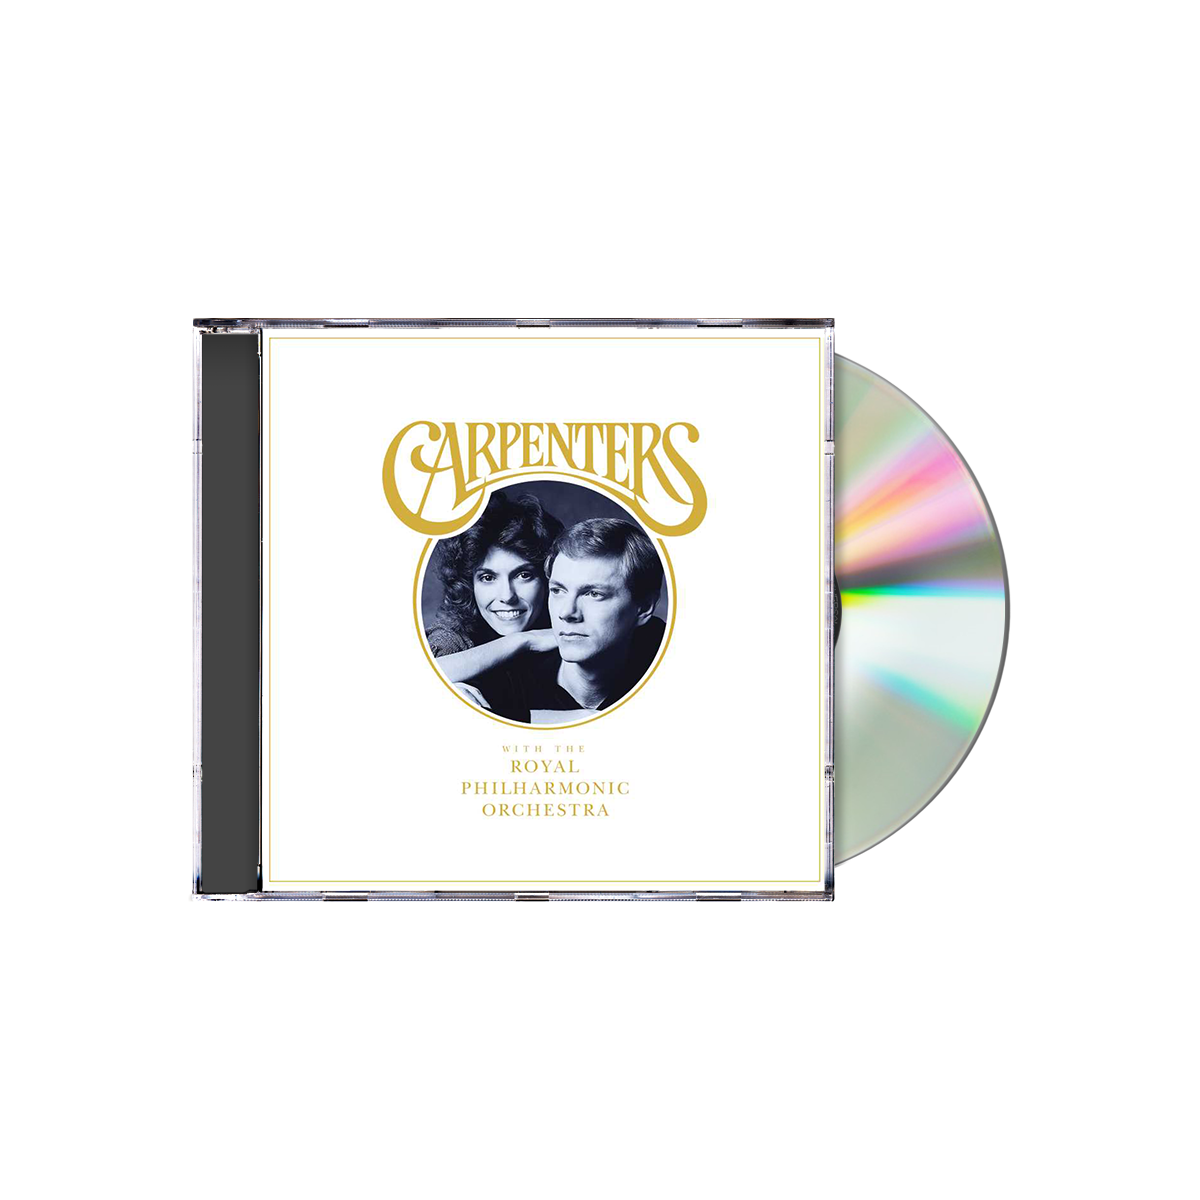 Carpenters - Carpenters With The Royal Philharmonic Orchestra CD